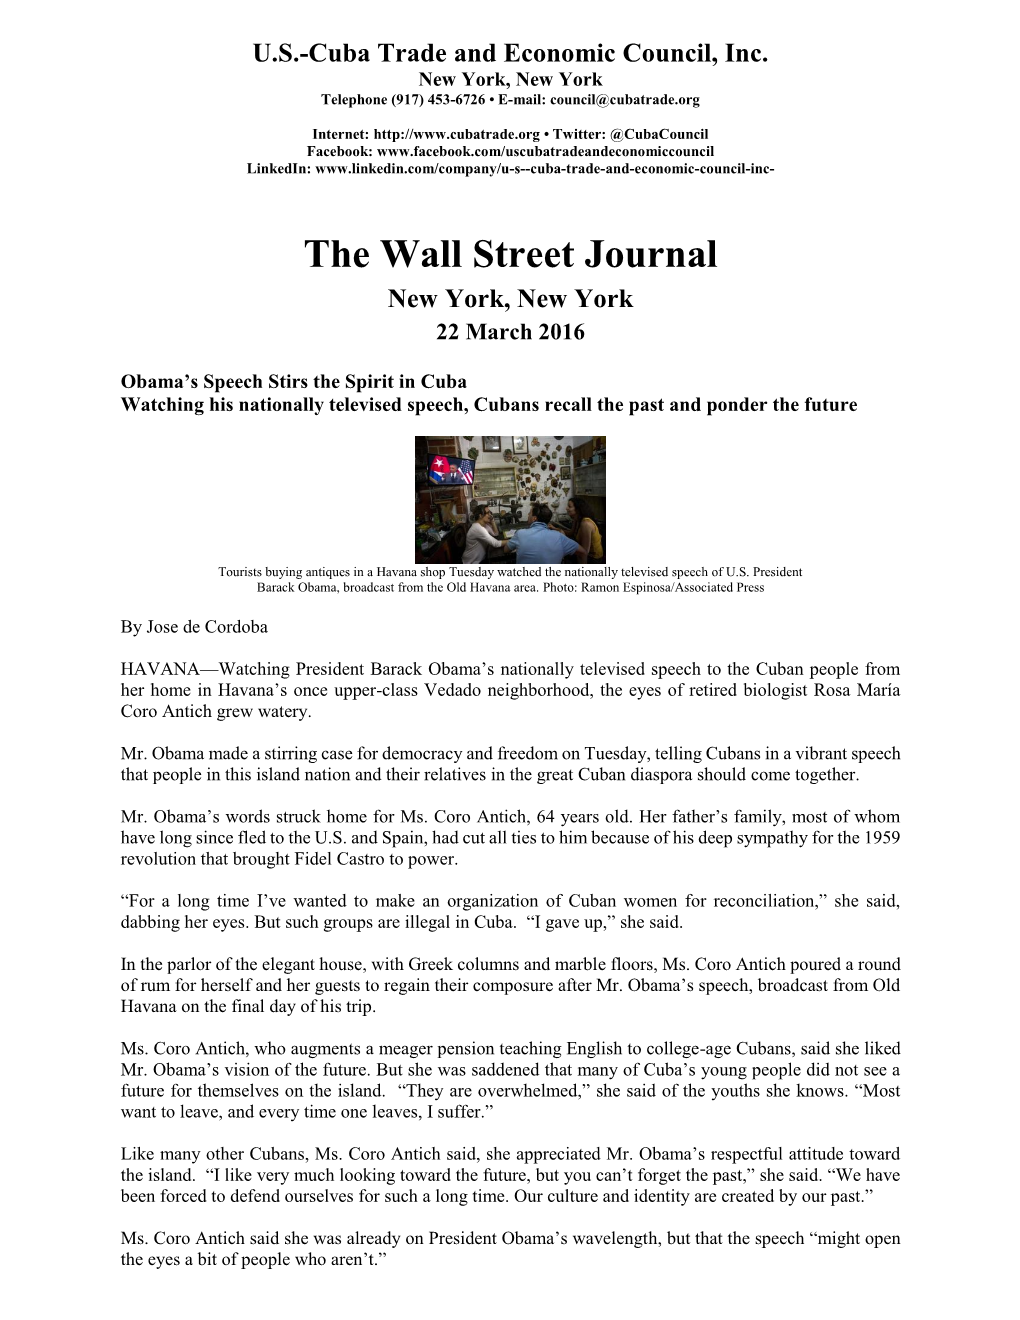 The Wall Street Journal New York, New York 22 March 2016